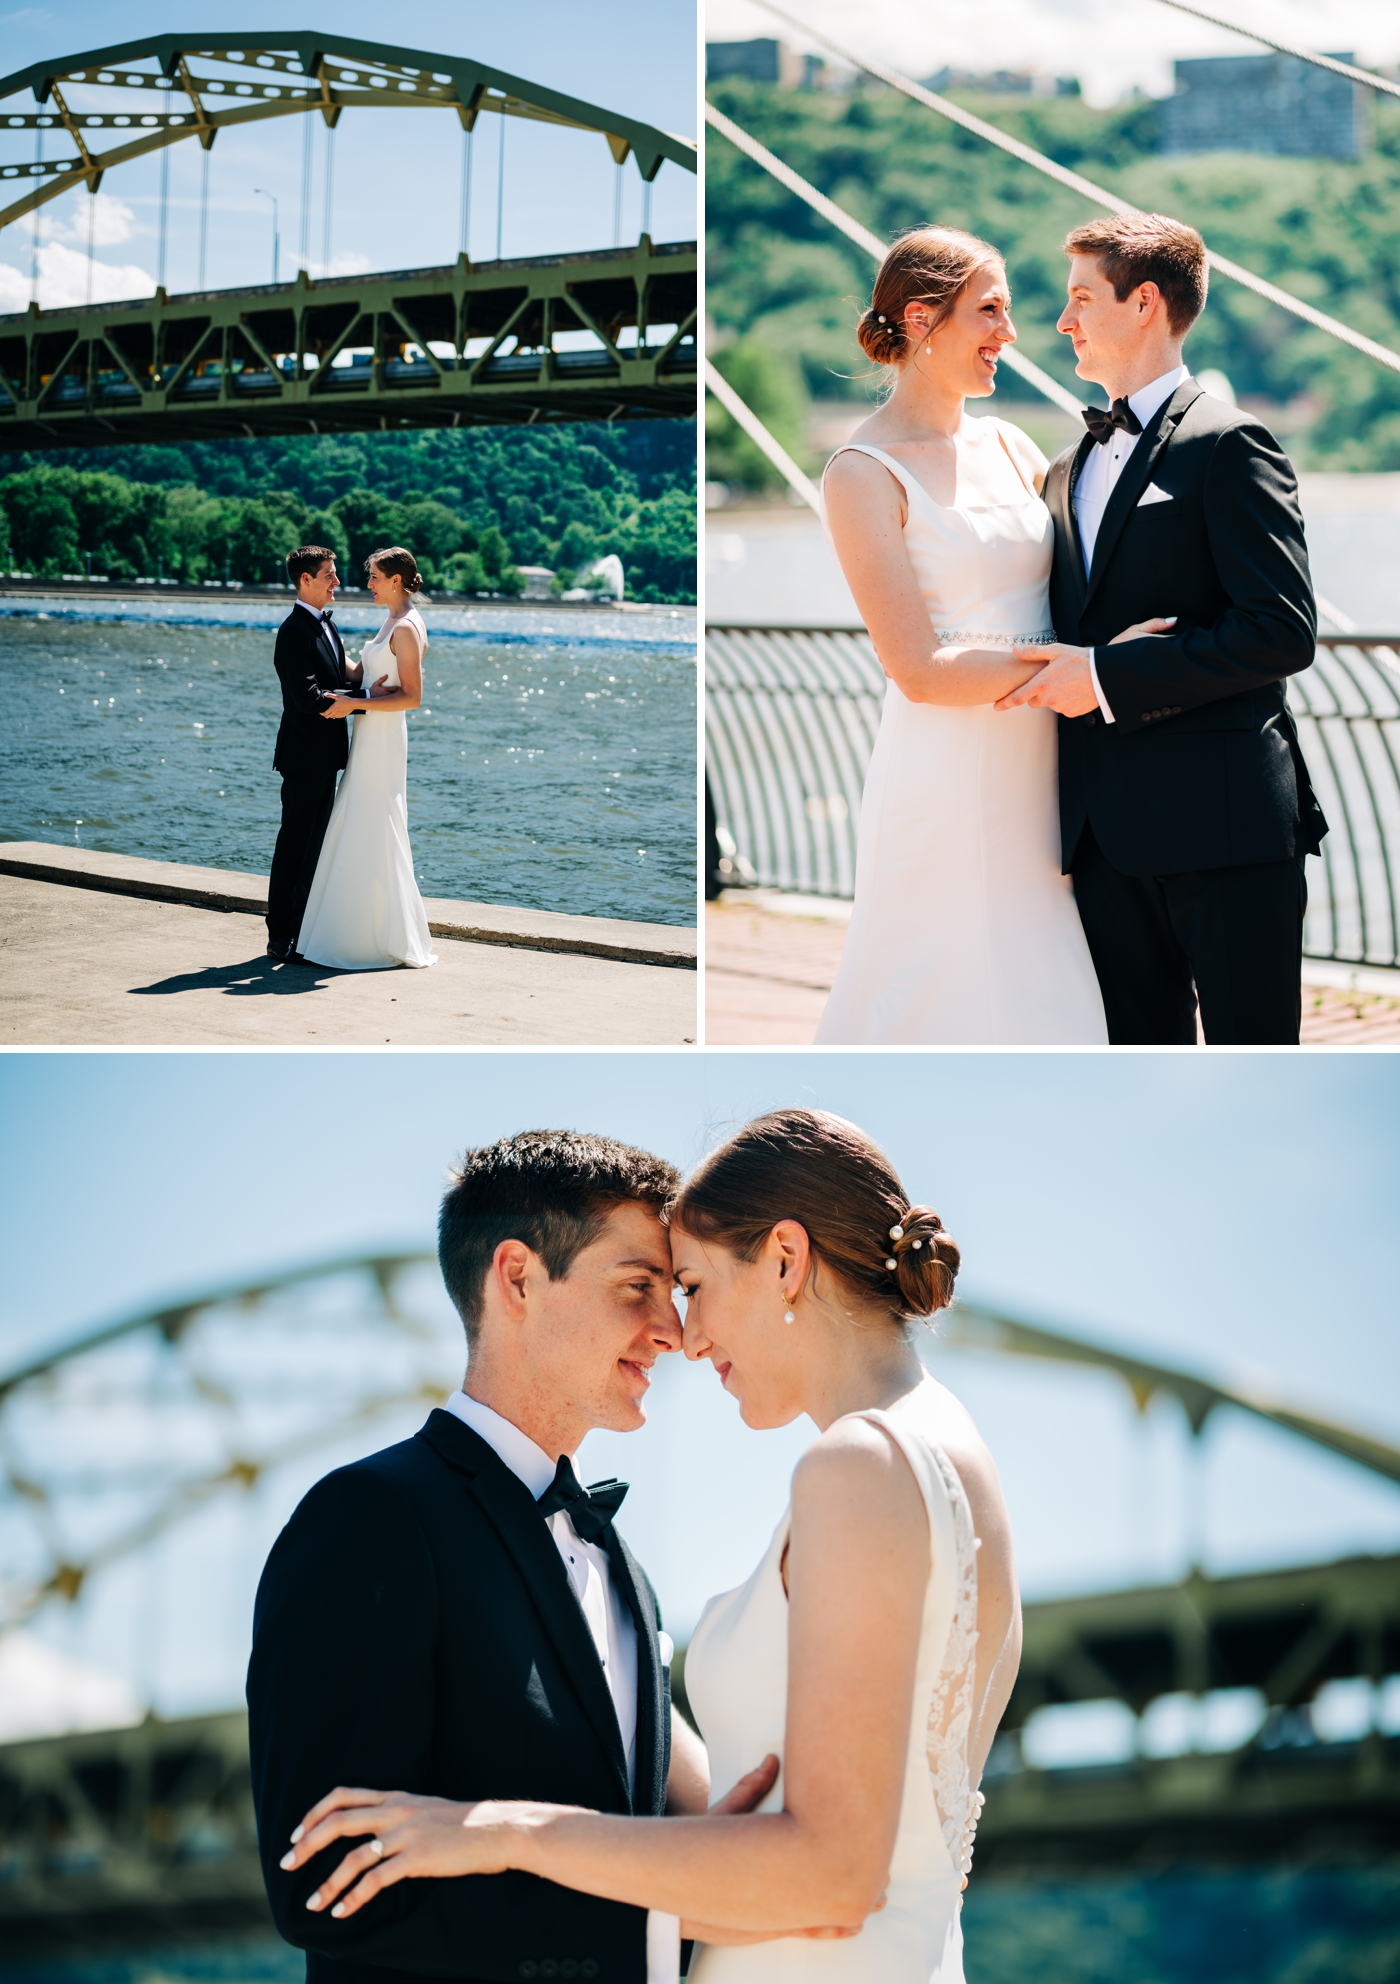 Bride & Groom Portraits at the North Shore of Pittsburgh by the Alleghany River